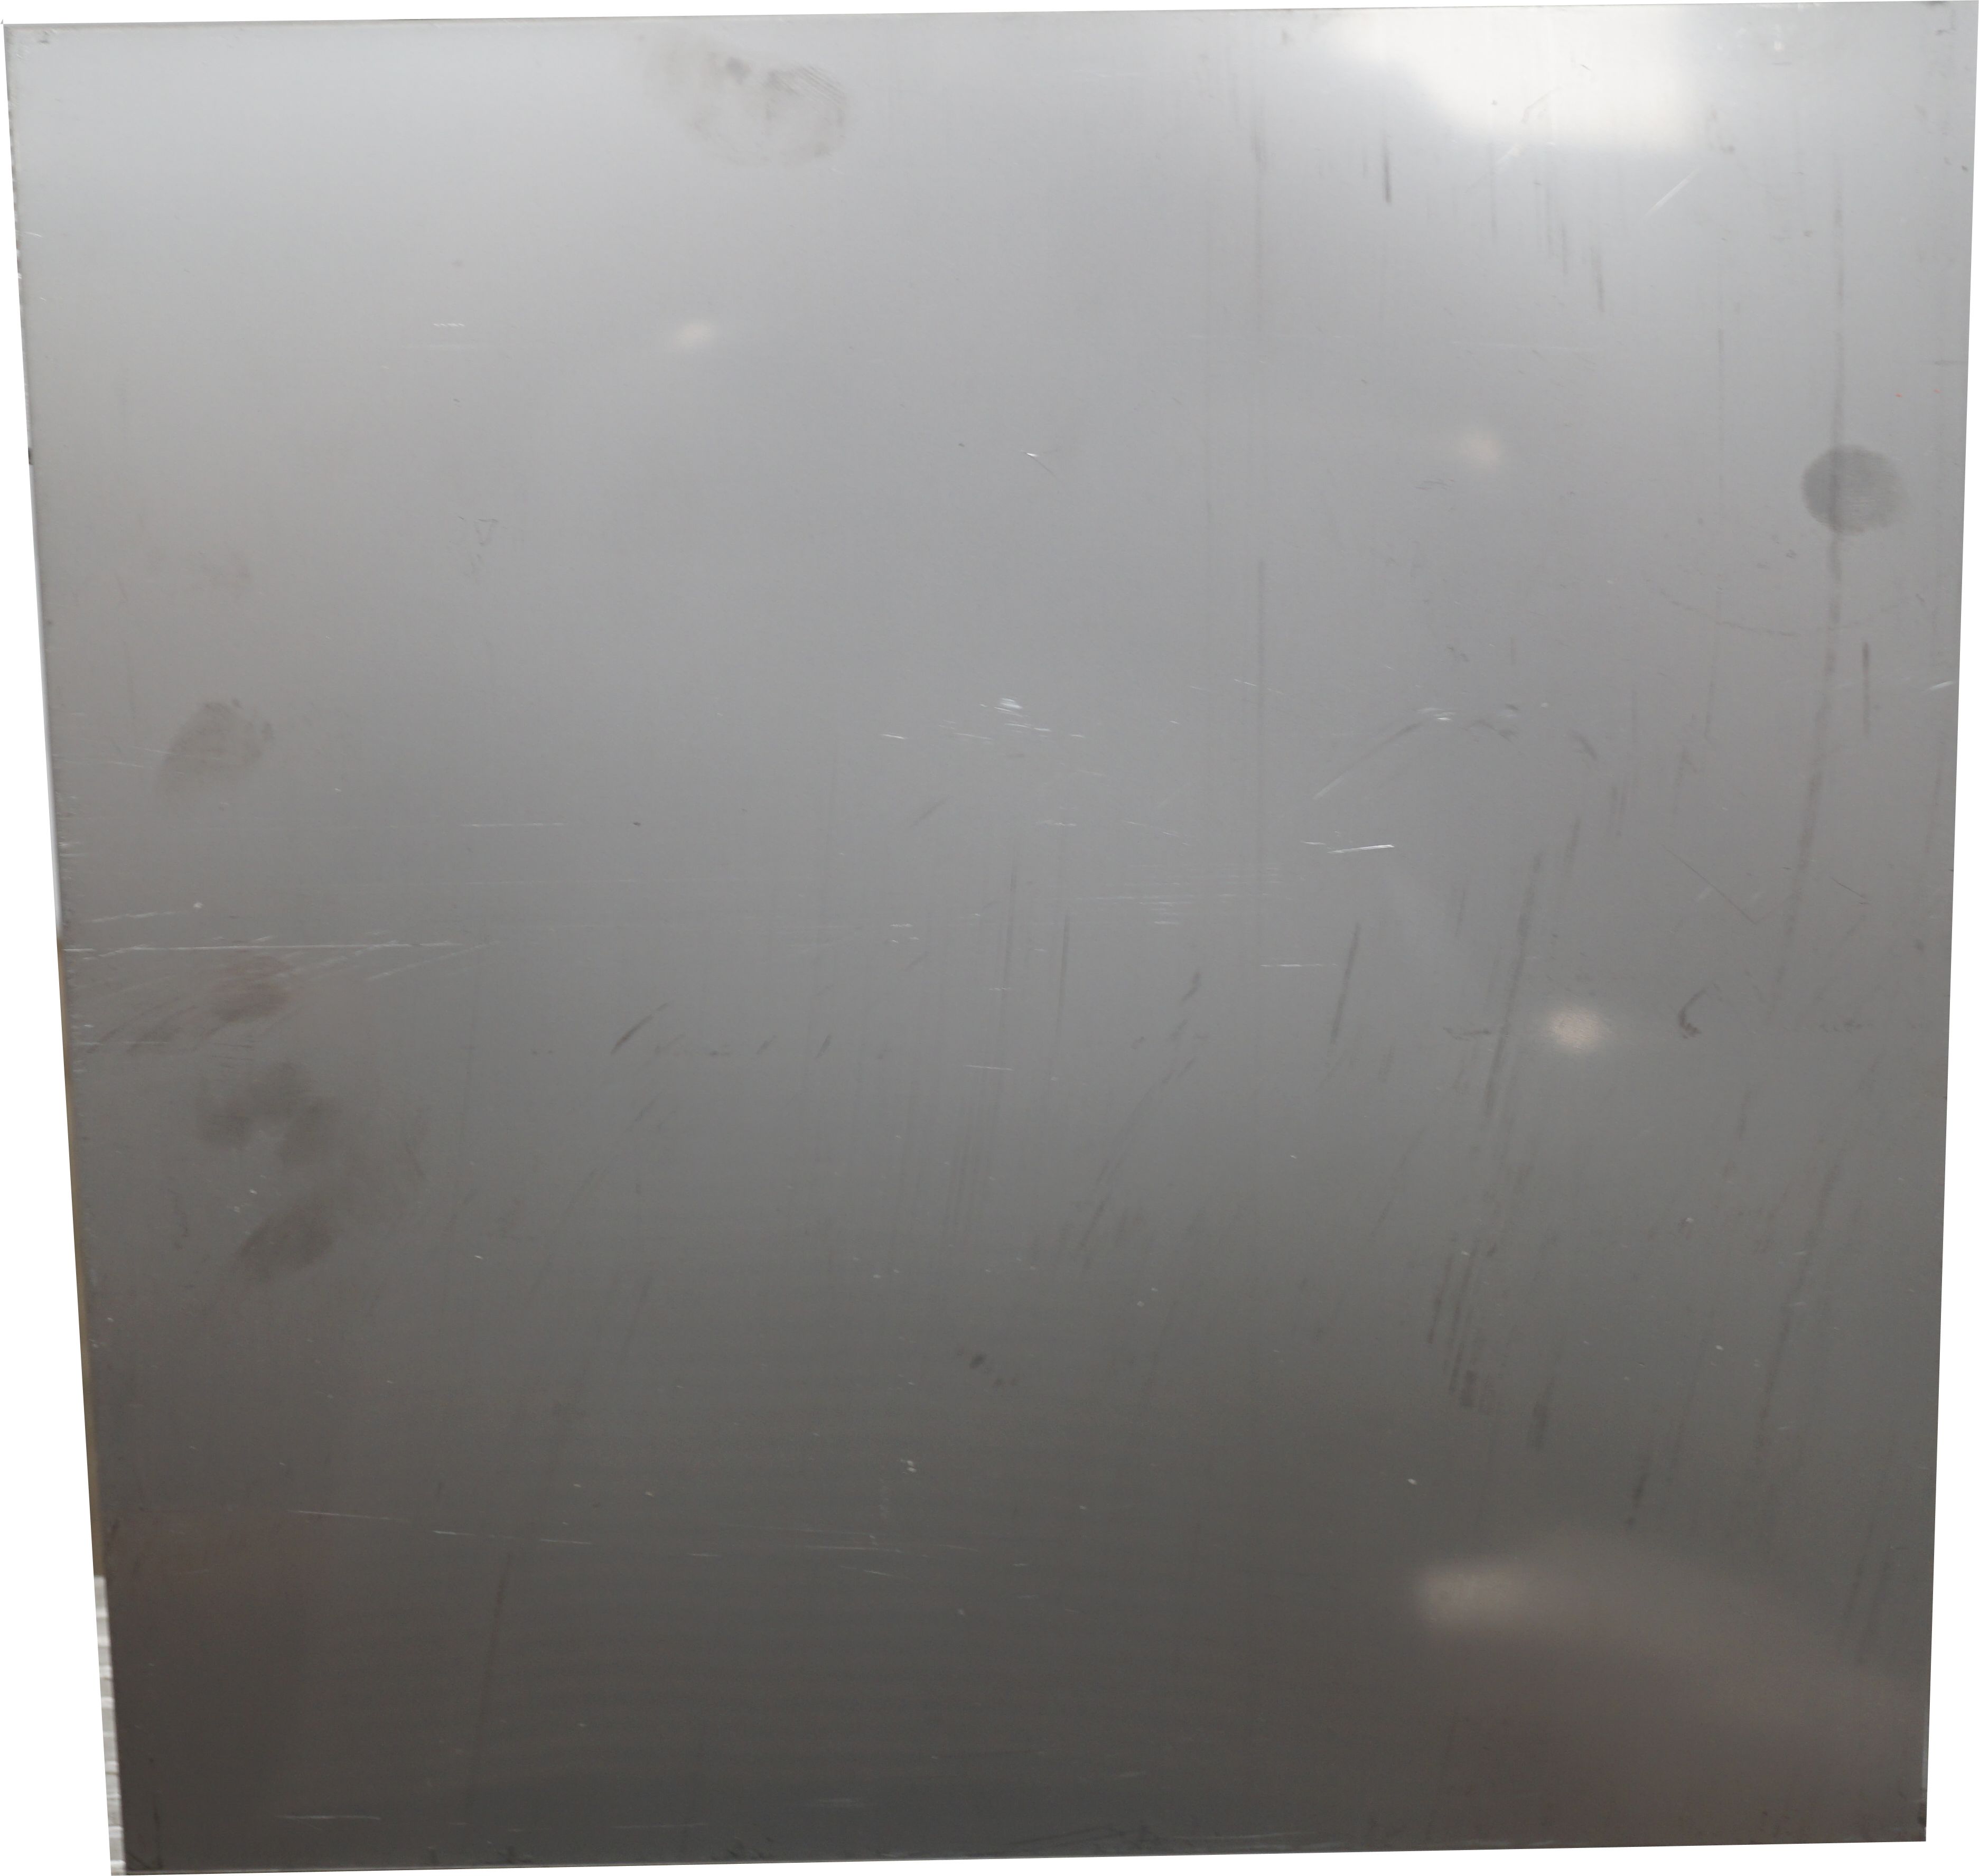 16SWG (1.5mm) Stainless Sheet 300mm x 300mm - Chronos Engineering Supplies